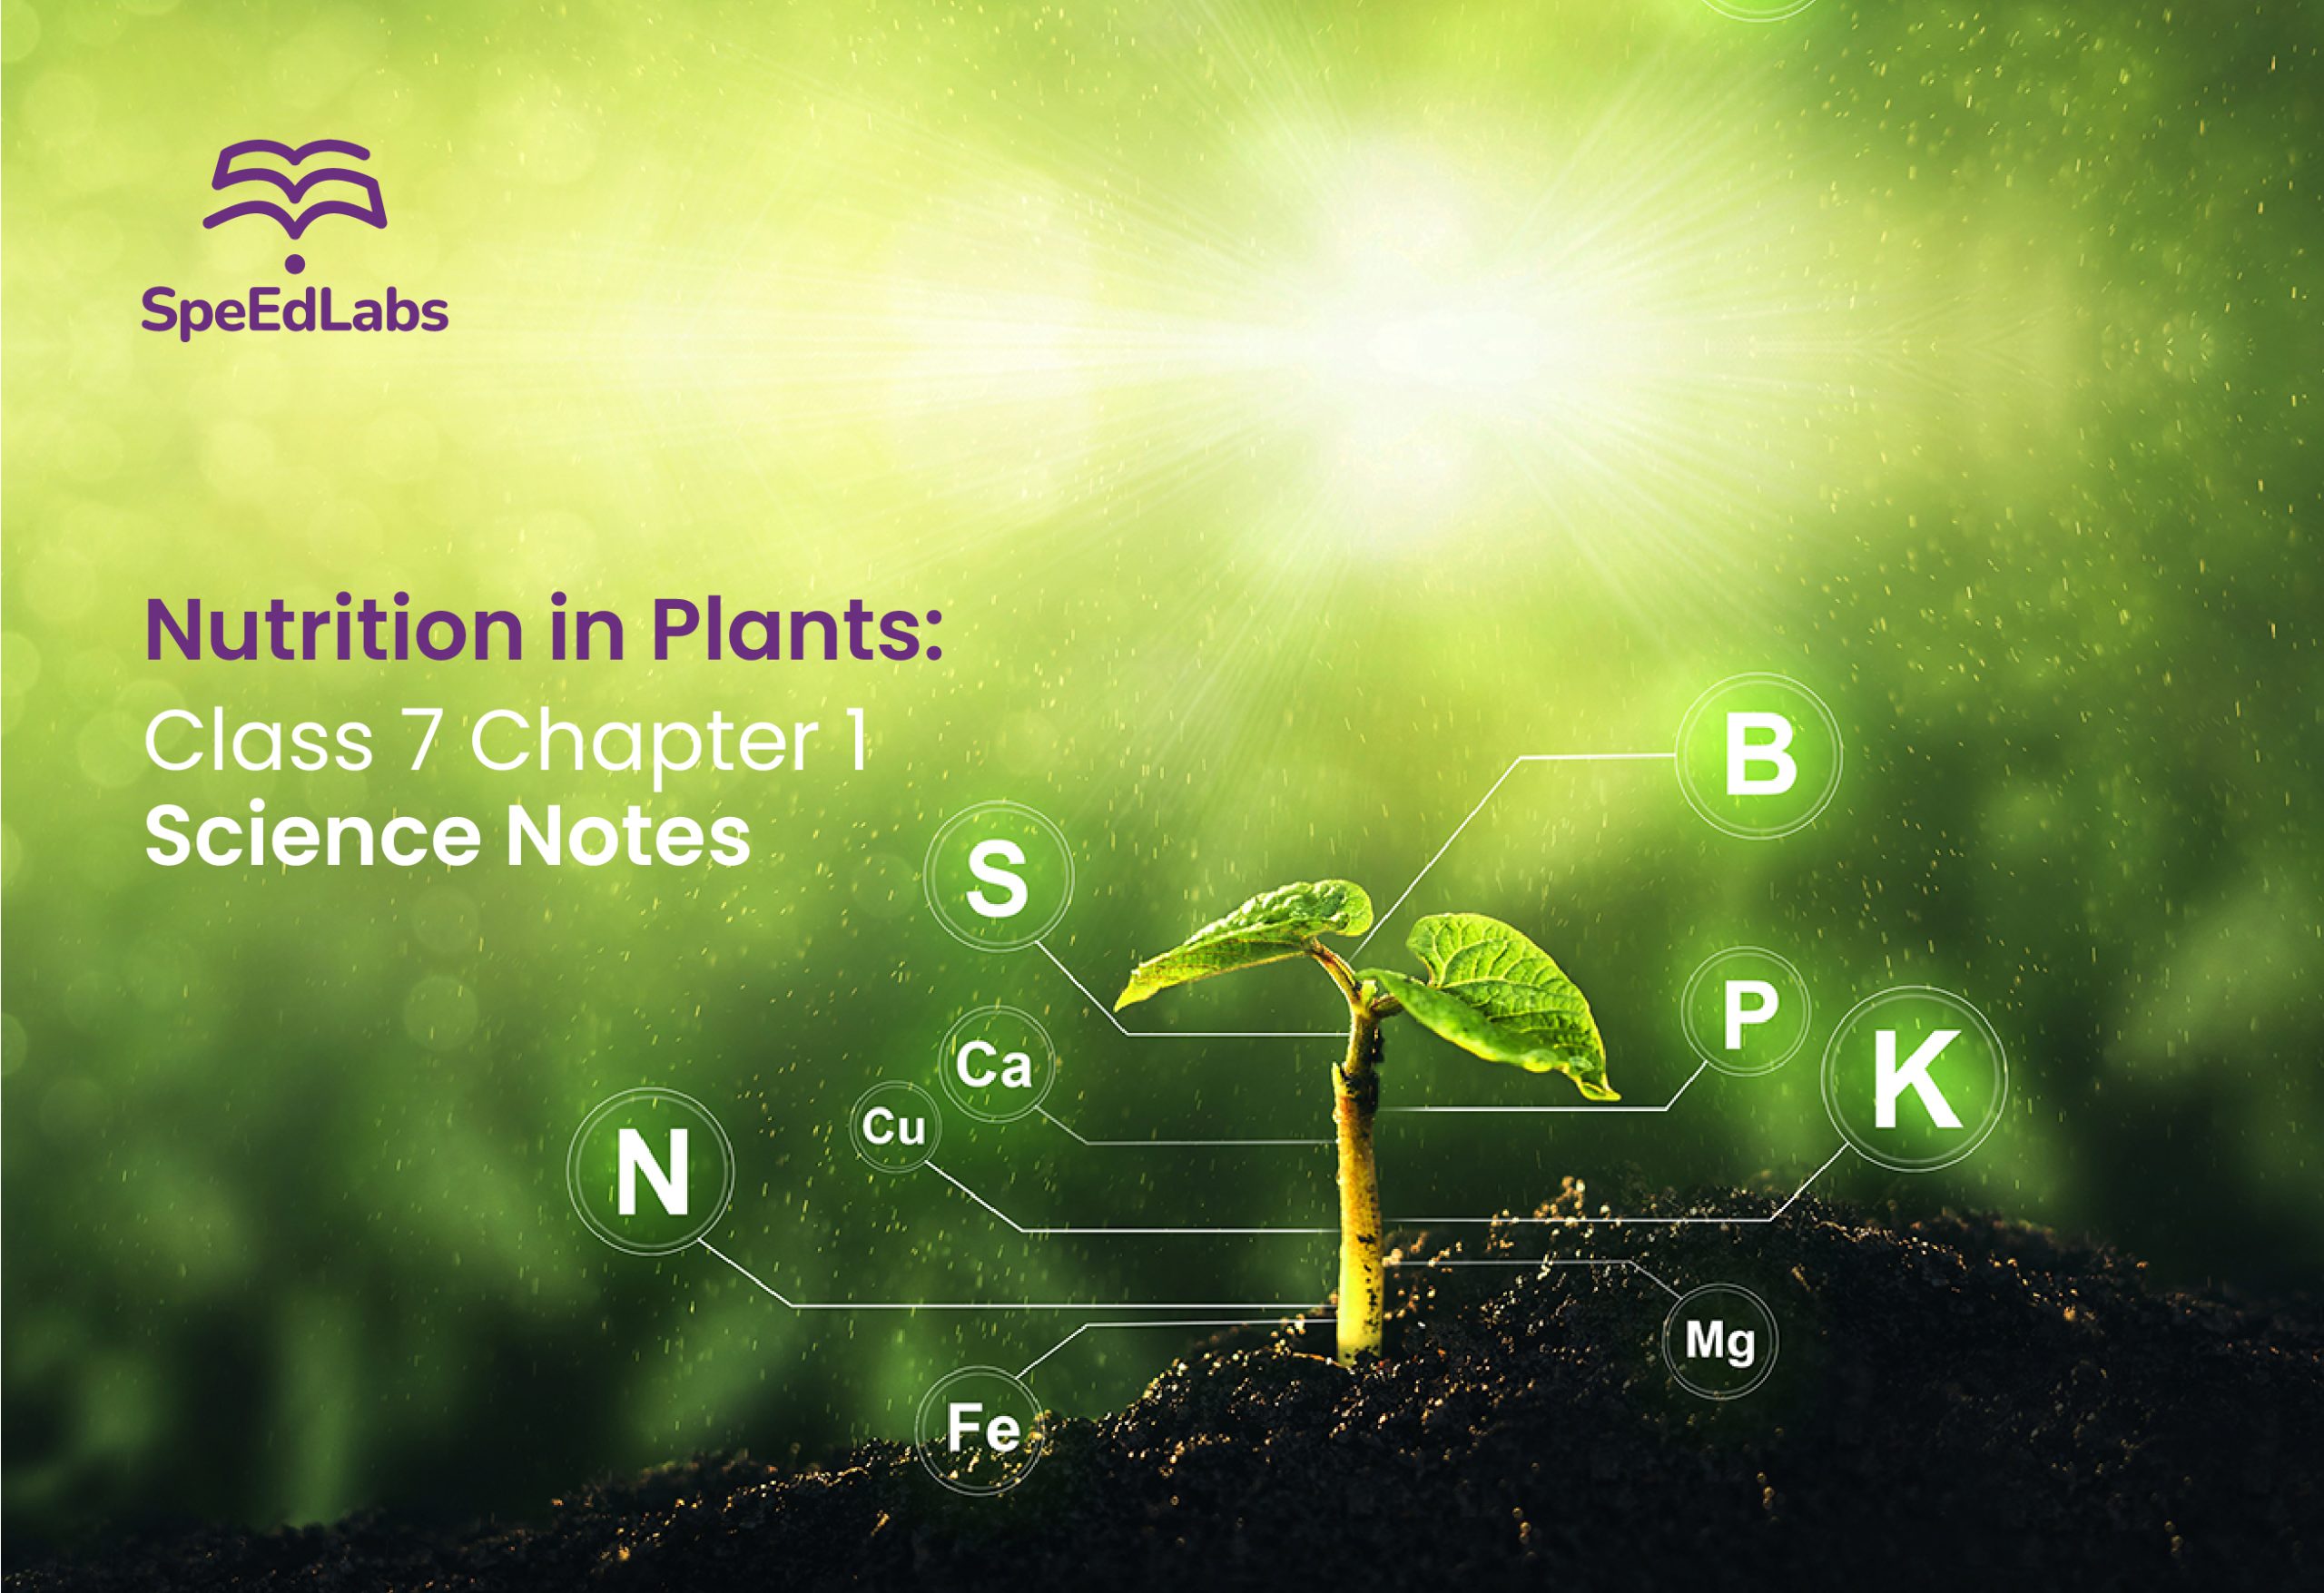 Nutrition in Plants: Class 7 Chapter 1 Science Notes - SpeedLabs Blog